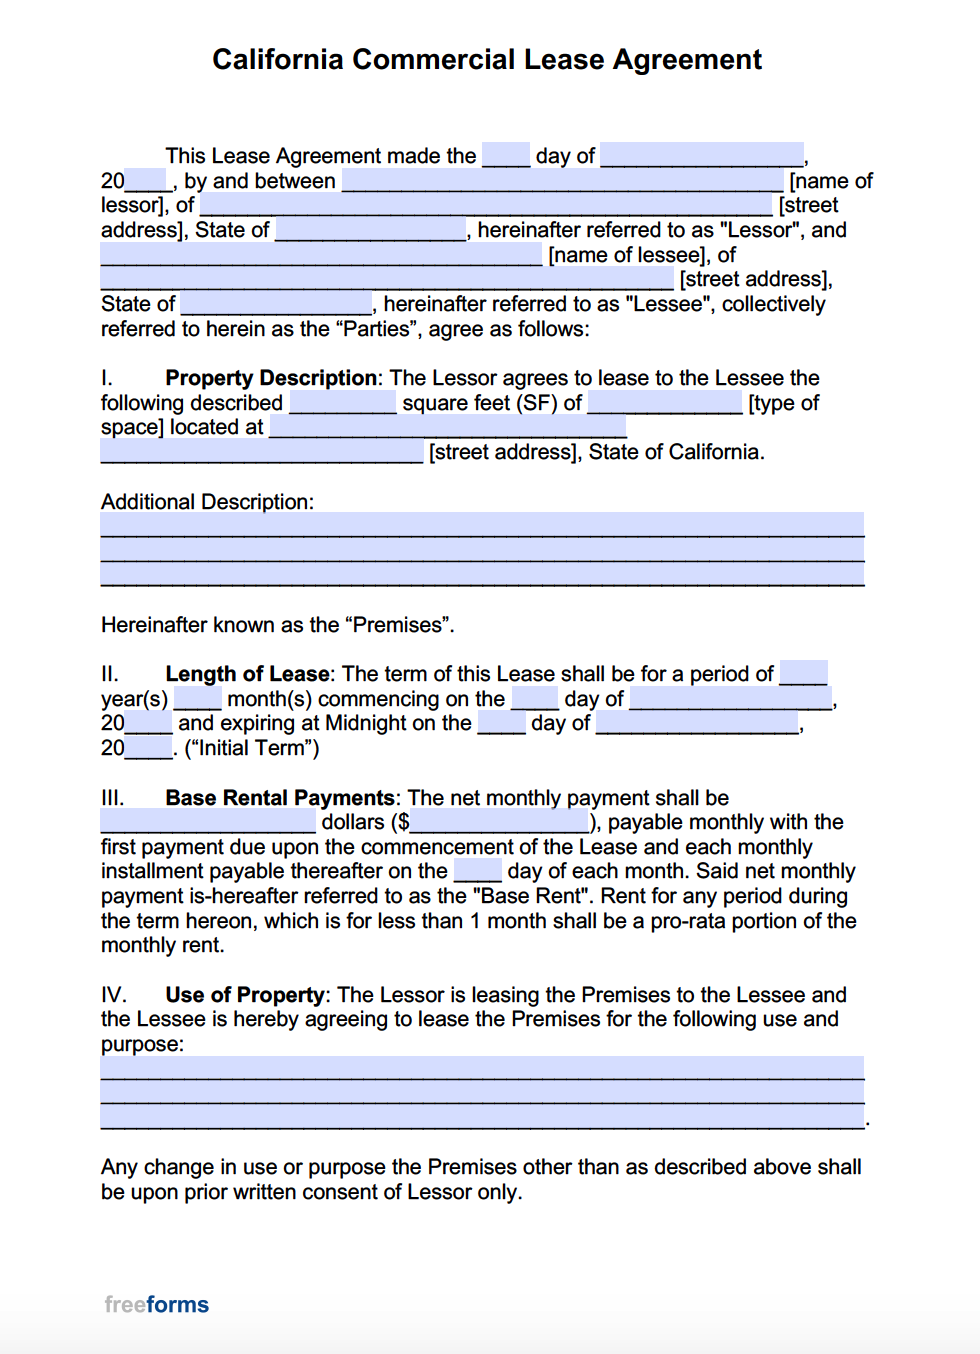 Free California Commercial Lease Agreement Template  PDF  WORD With commercial lease agreement template word